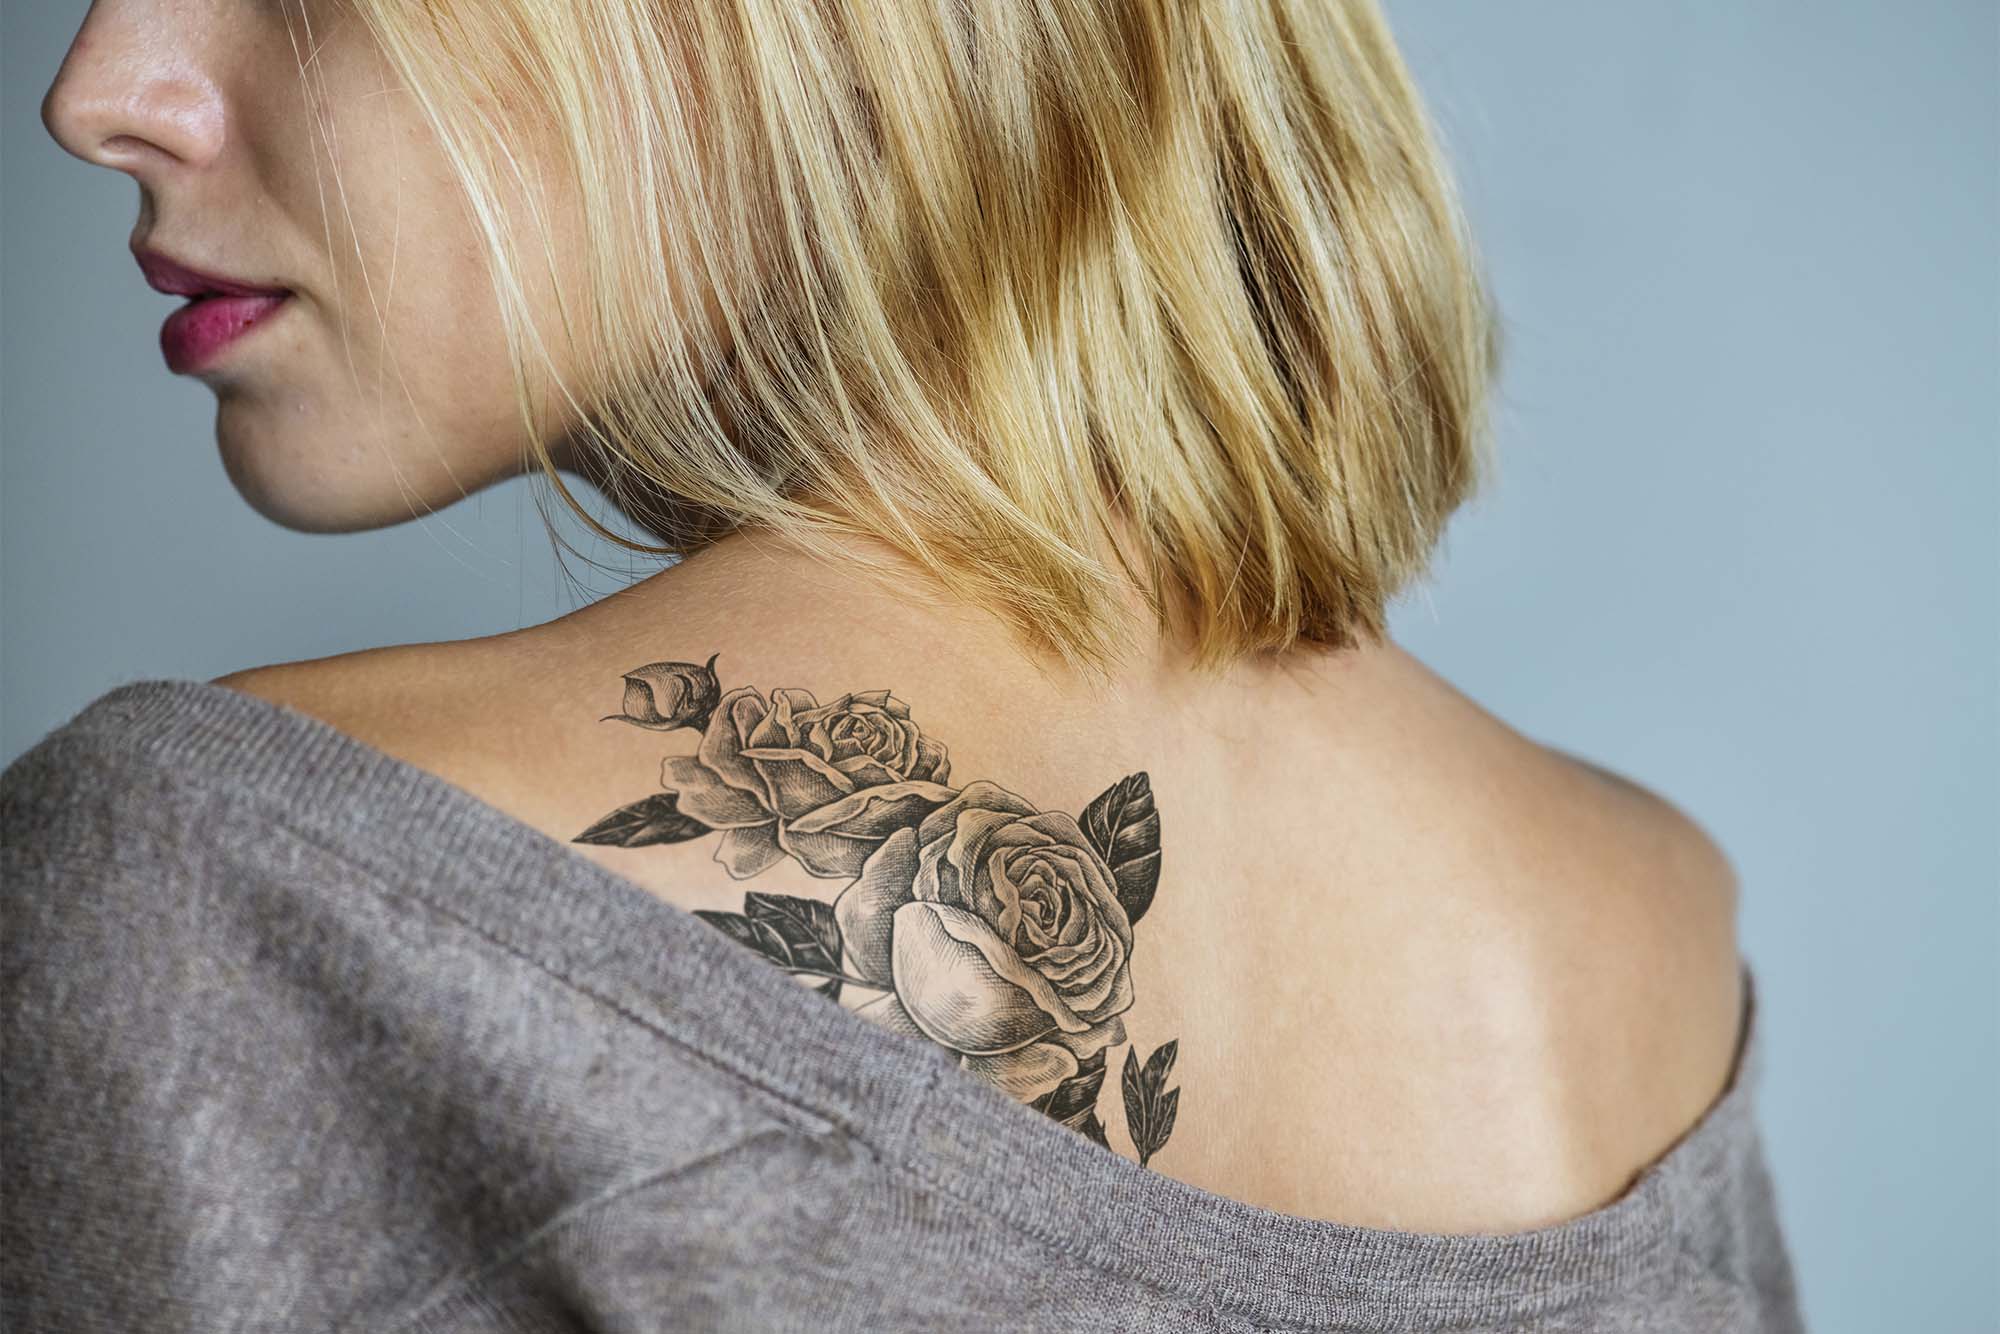 Tattoo Removal Orange County  Natural Image OC